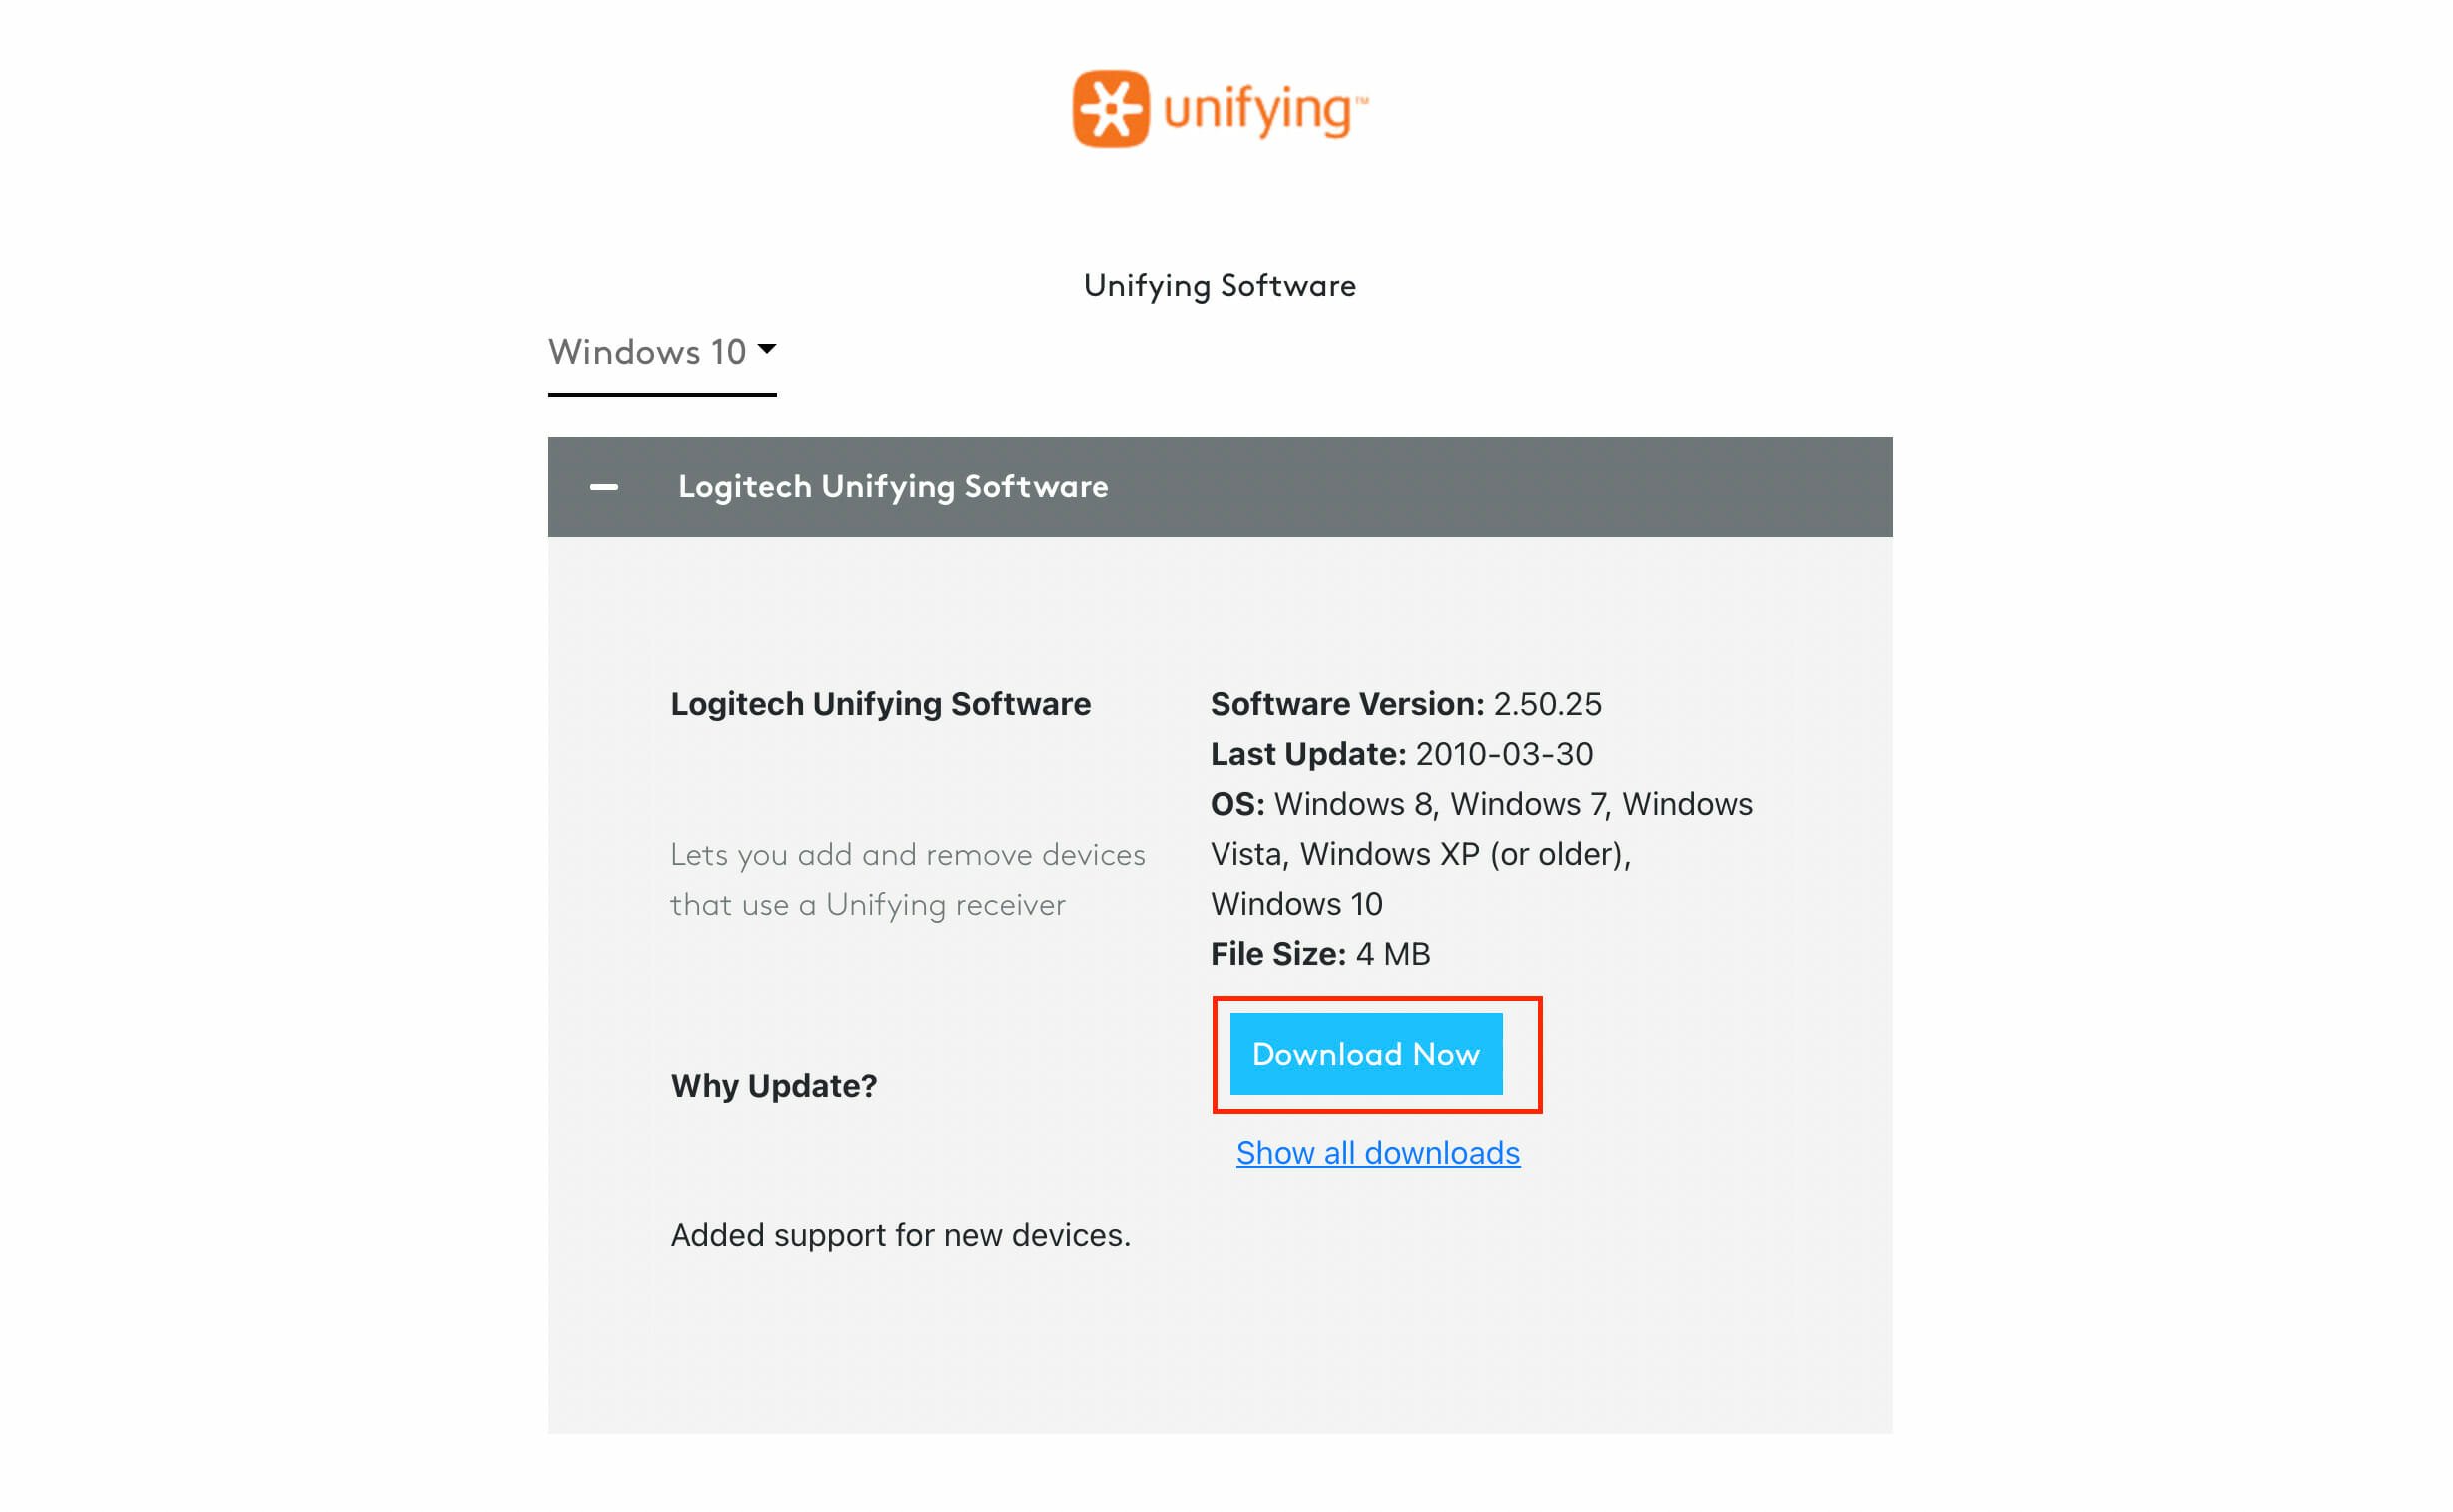 Downloading the Logitech Unifying software